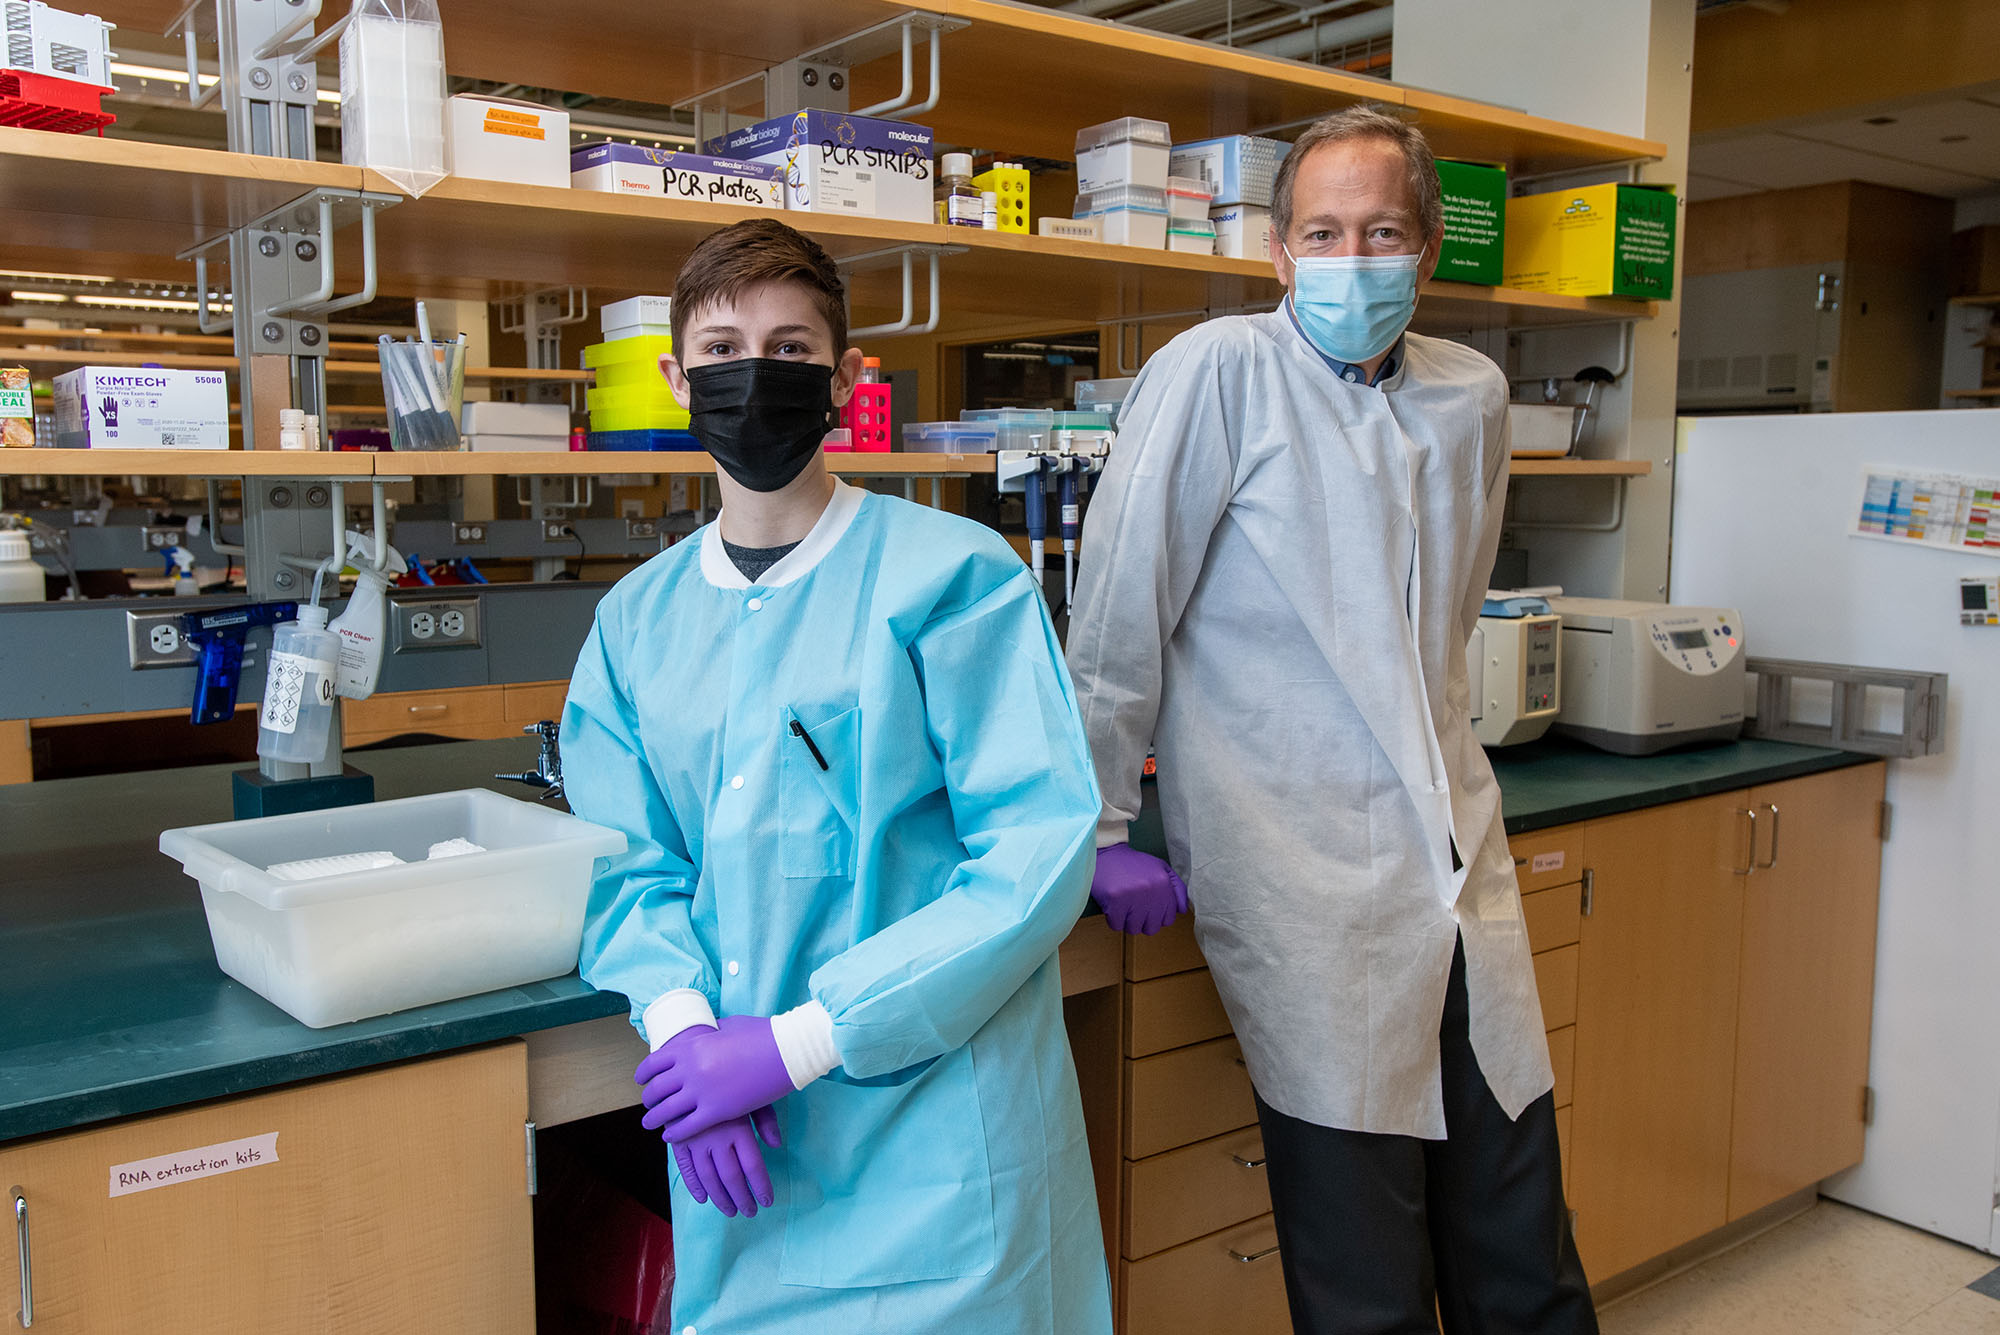 NEIDL scientists Jackie Turcinovic stands on the left and John Connor on the right in a lab.